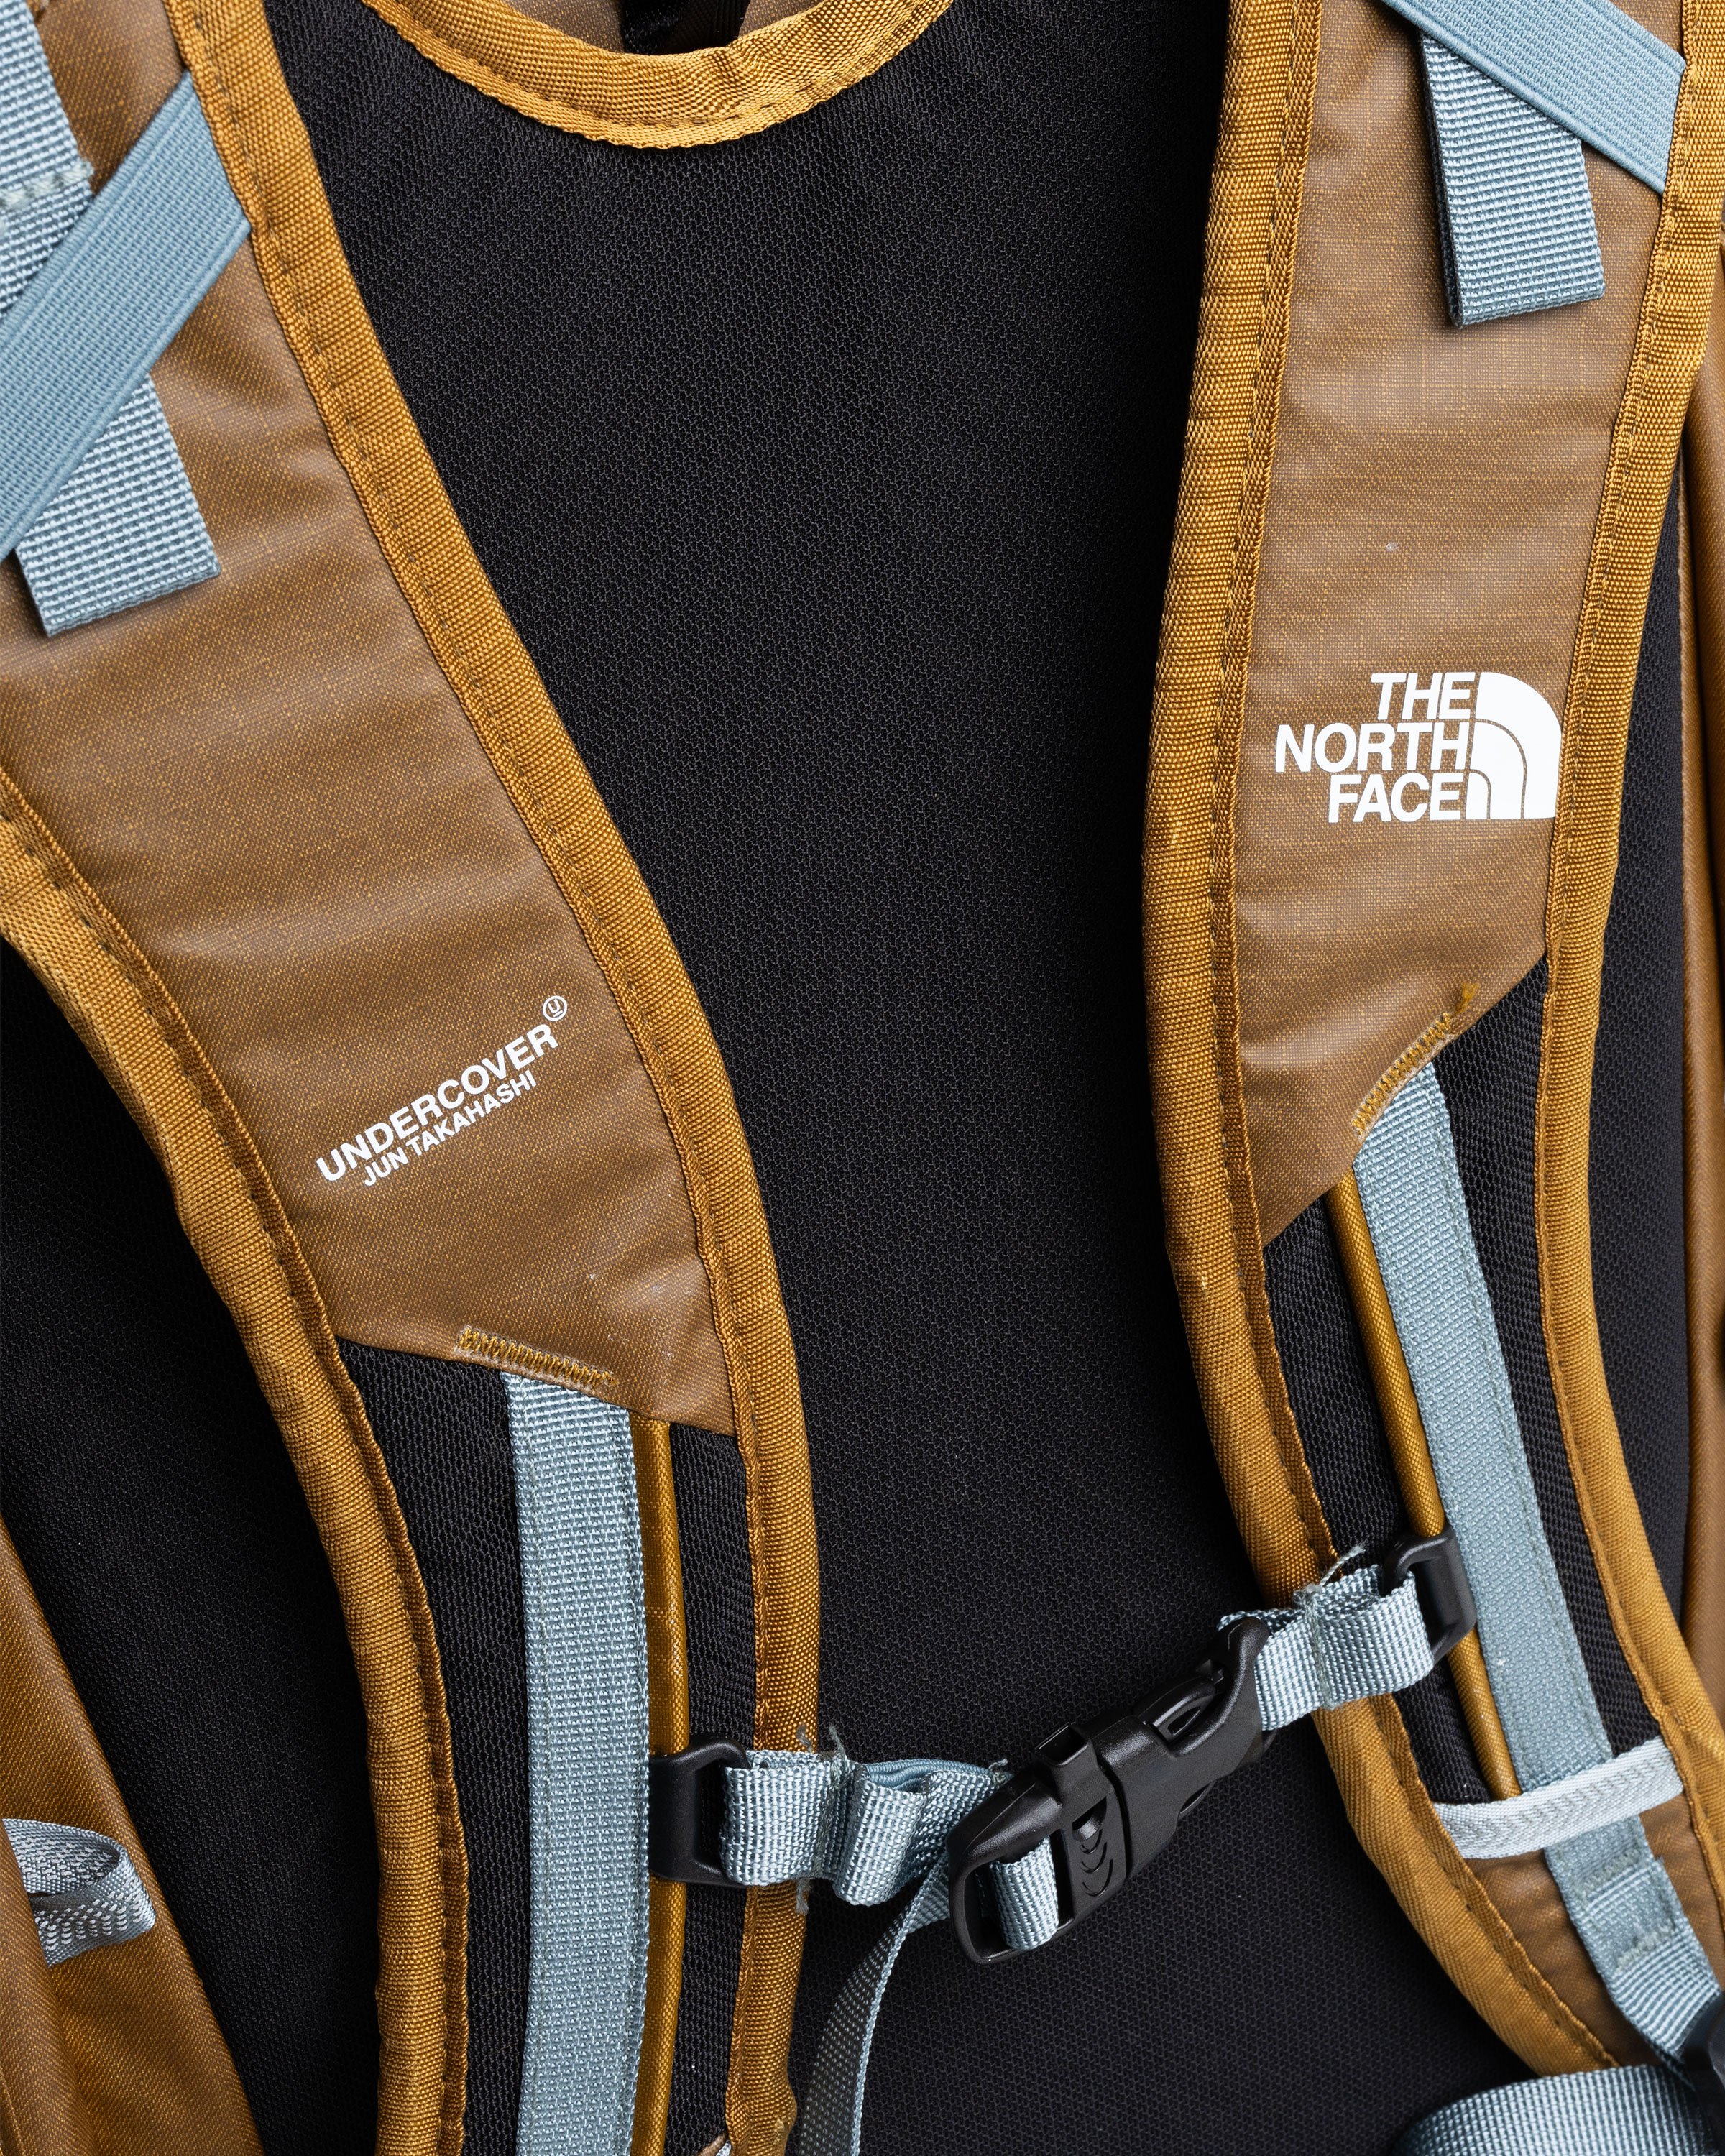 The North Face x UNDERCOVER - Soukuu Backpack Bronze Brown/Concrete Gray - Accessories - Multi - Image 8